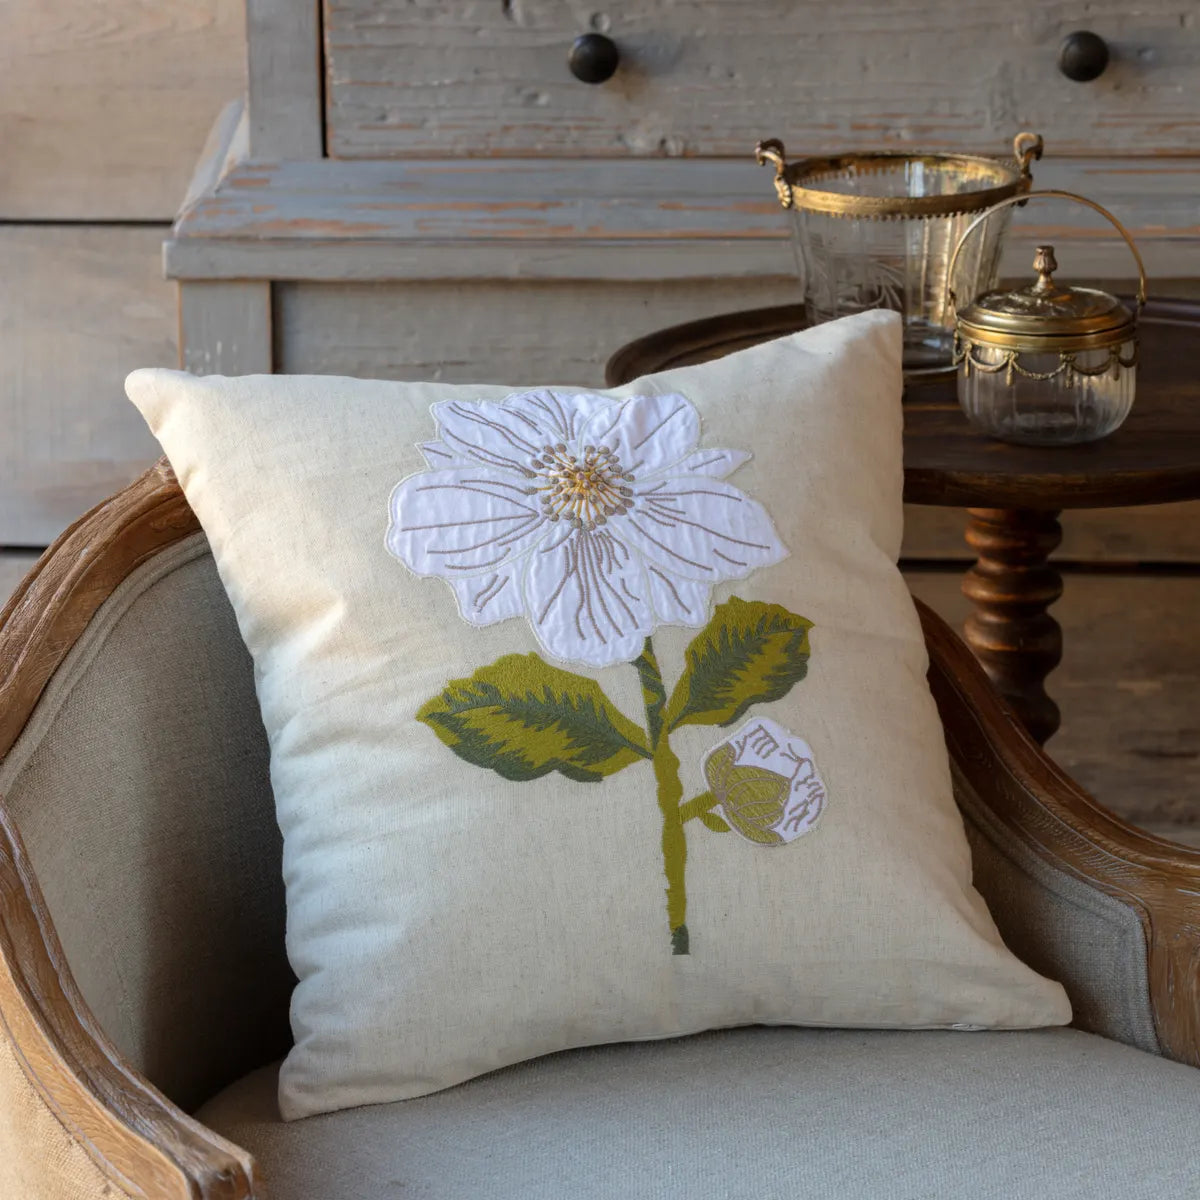 Appliqued & Embroidered Camellia pillow